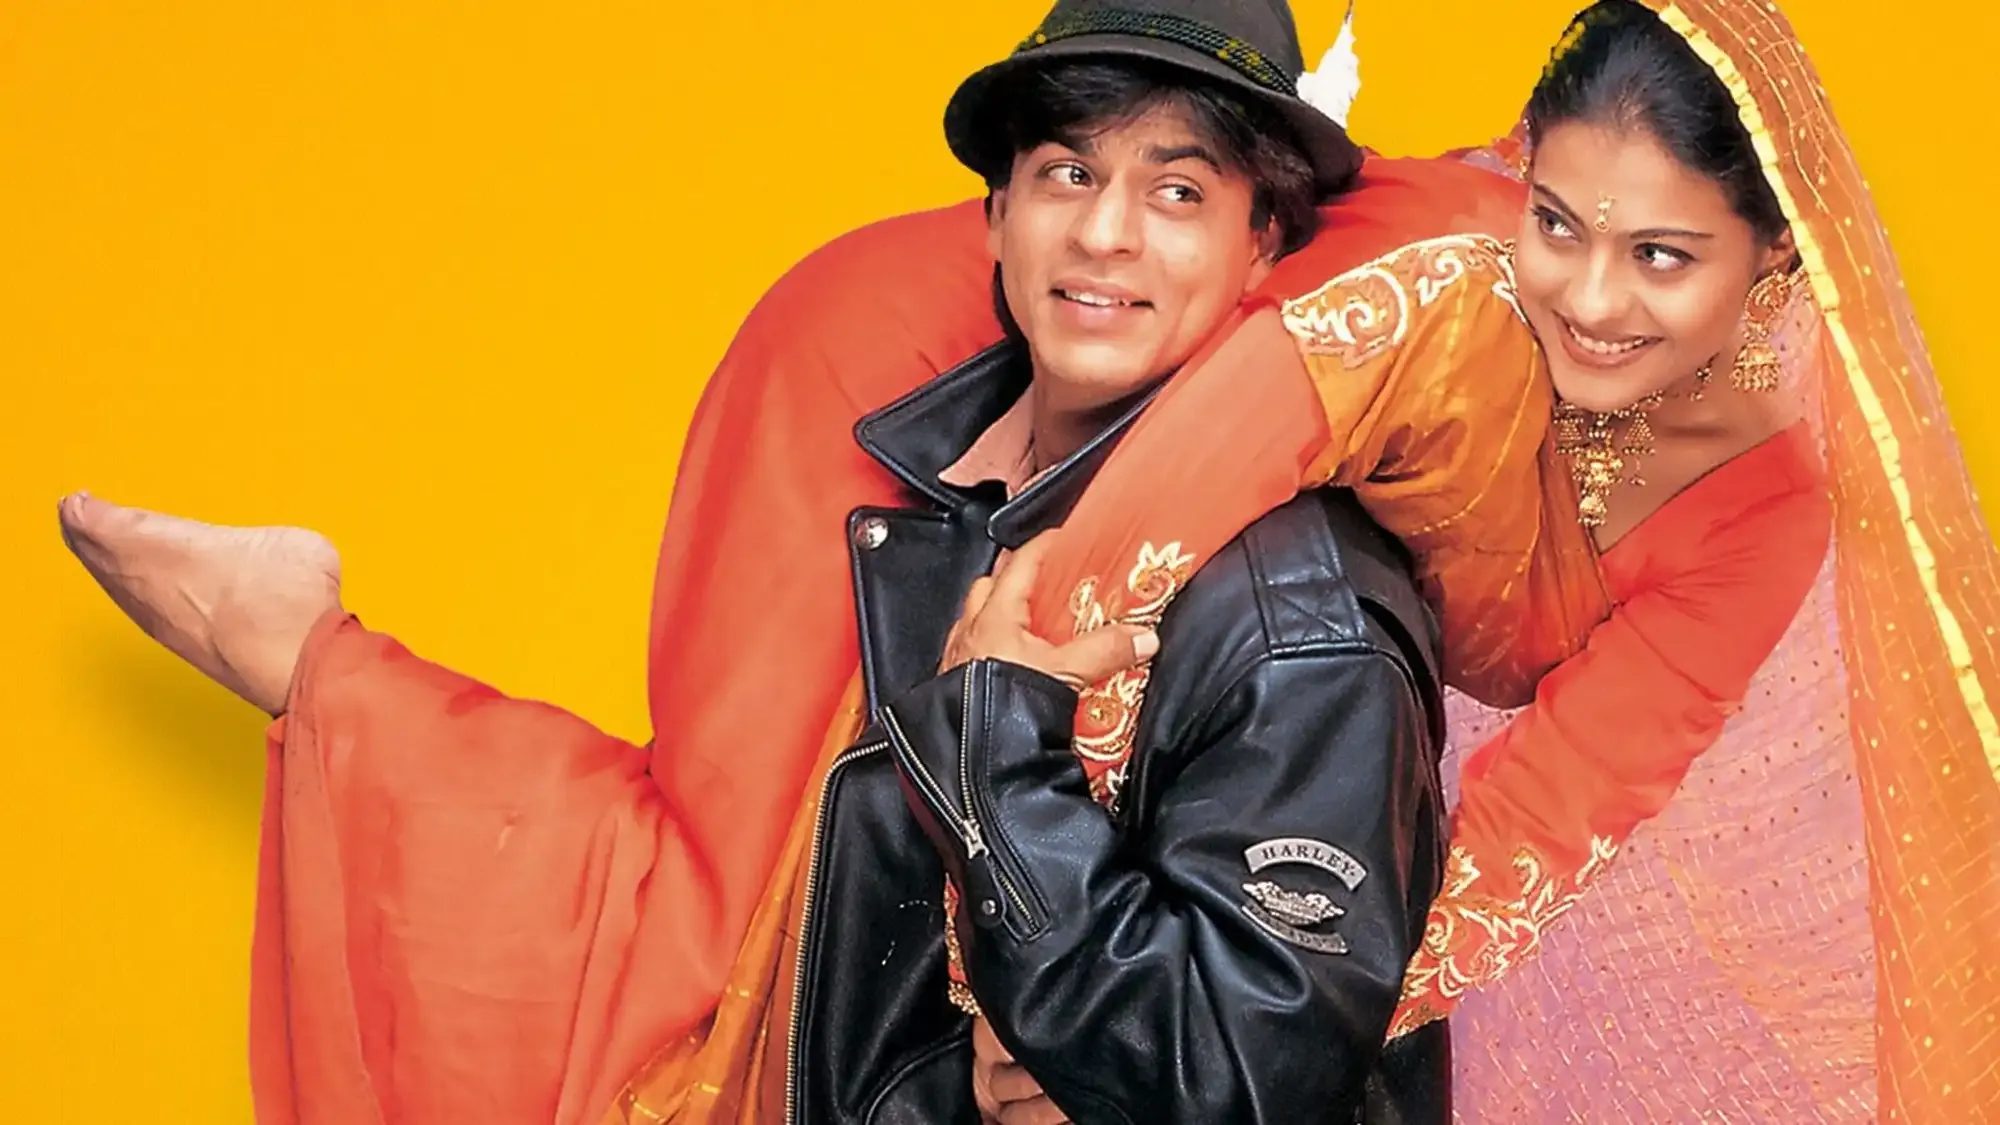 Dilwale Dulhania Le Jayenge movie review